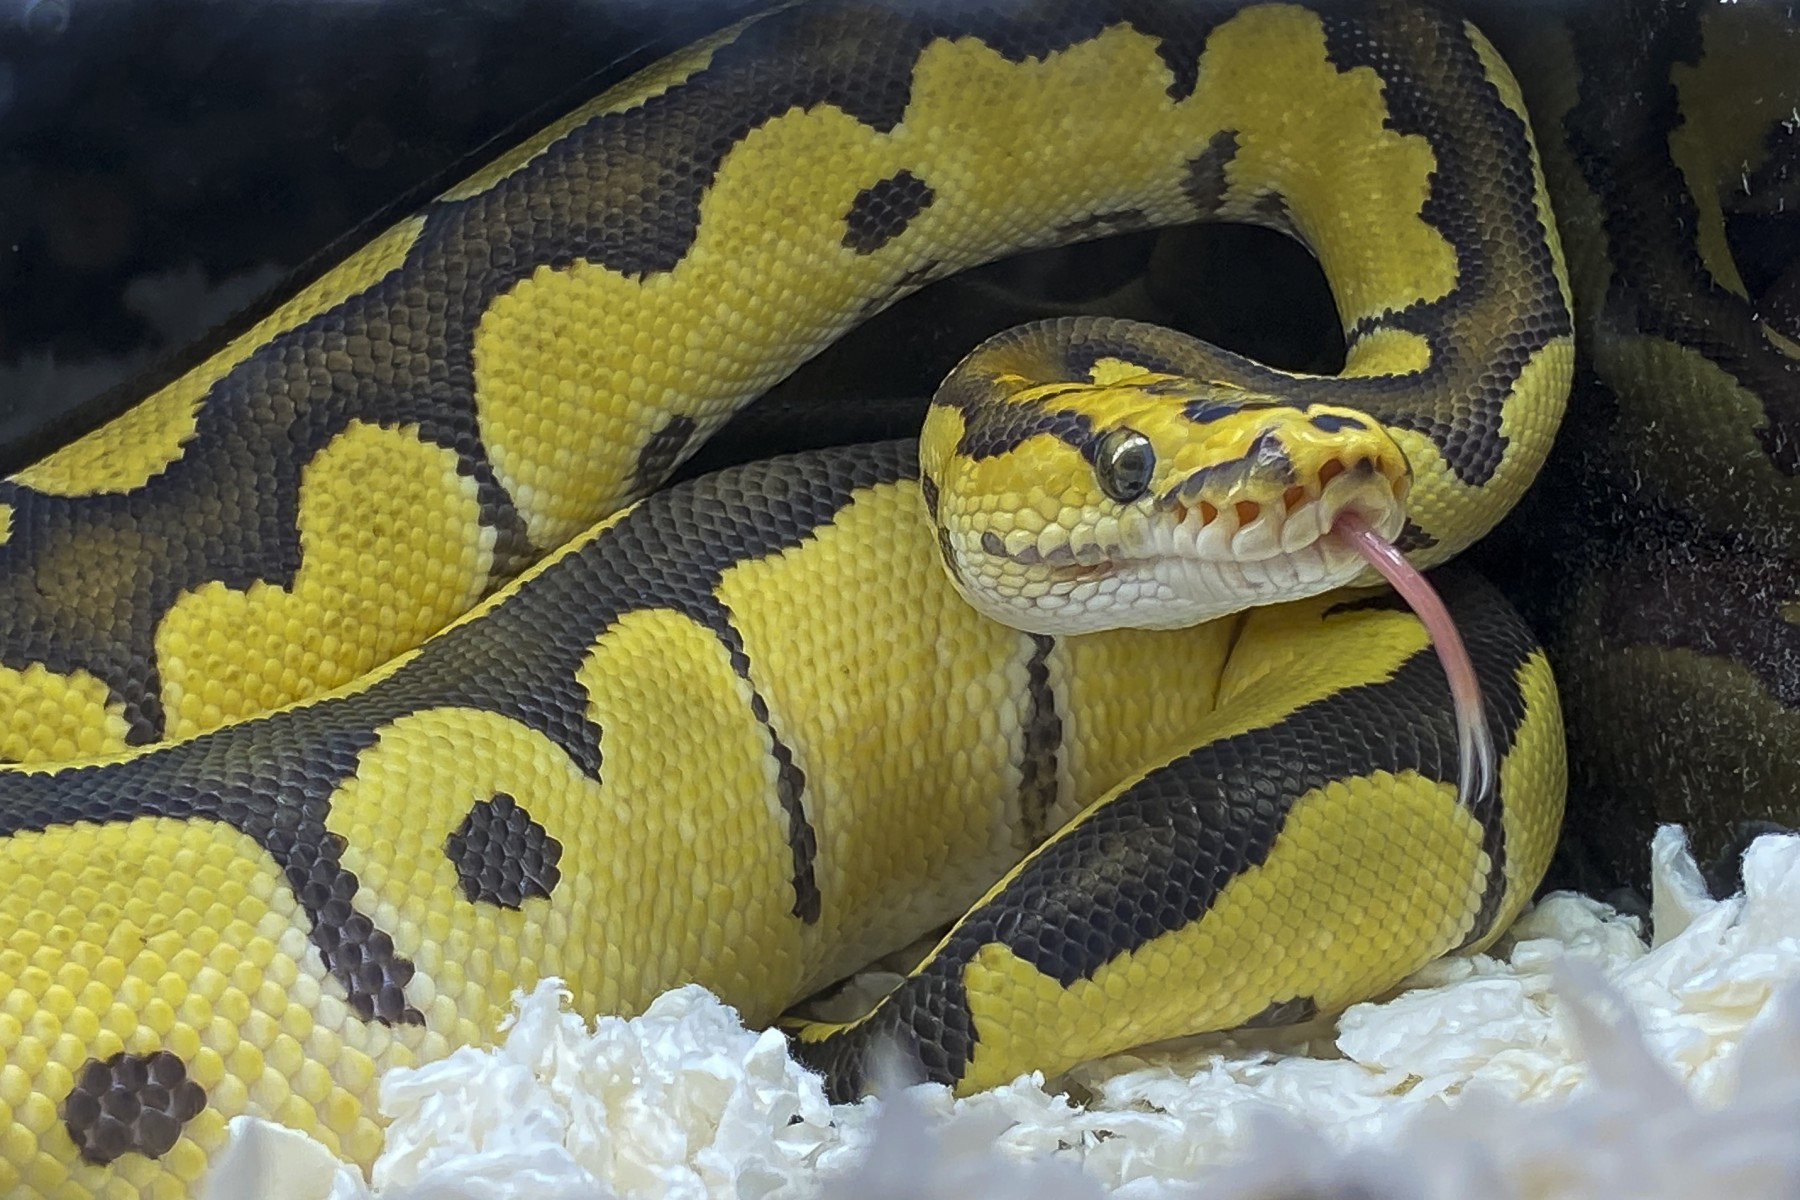 A snake with their tongue sticking out